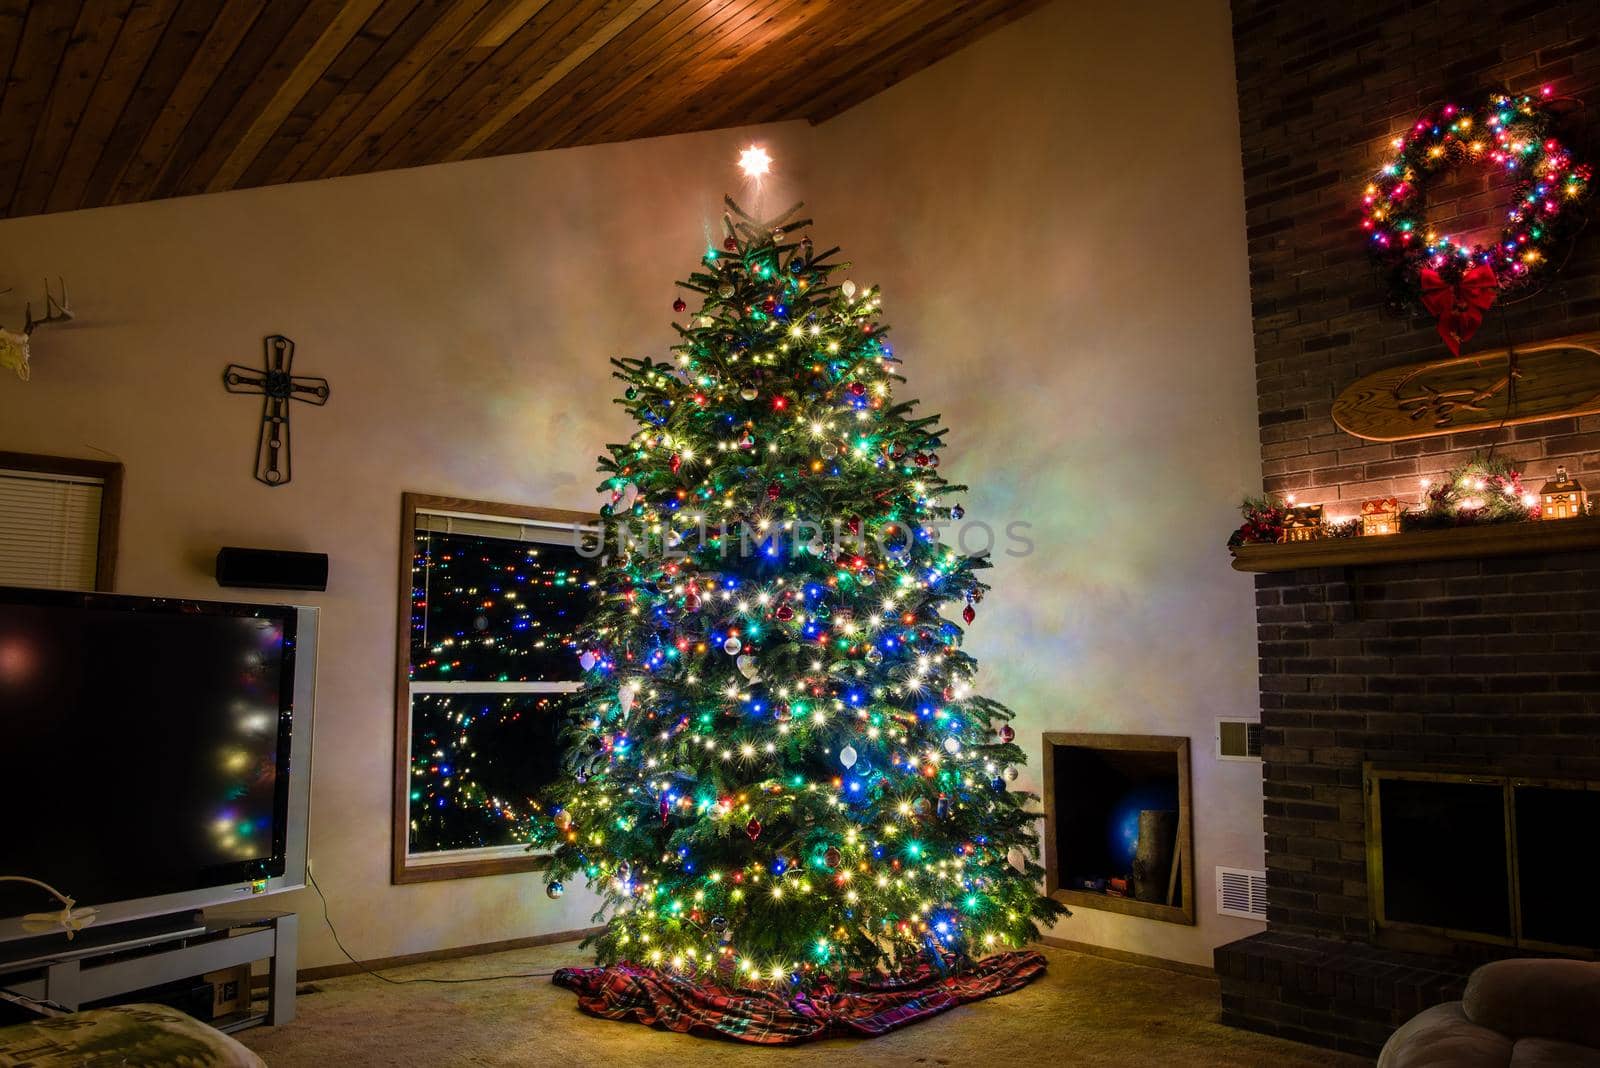 Large Christmas tree lit up in living room with wreath and cross. by jyurinko